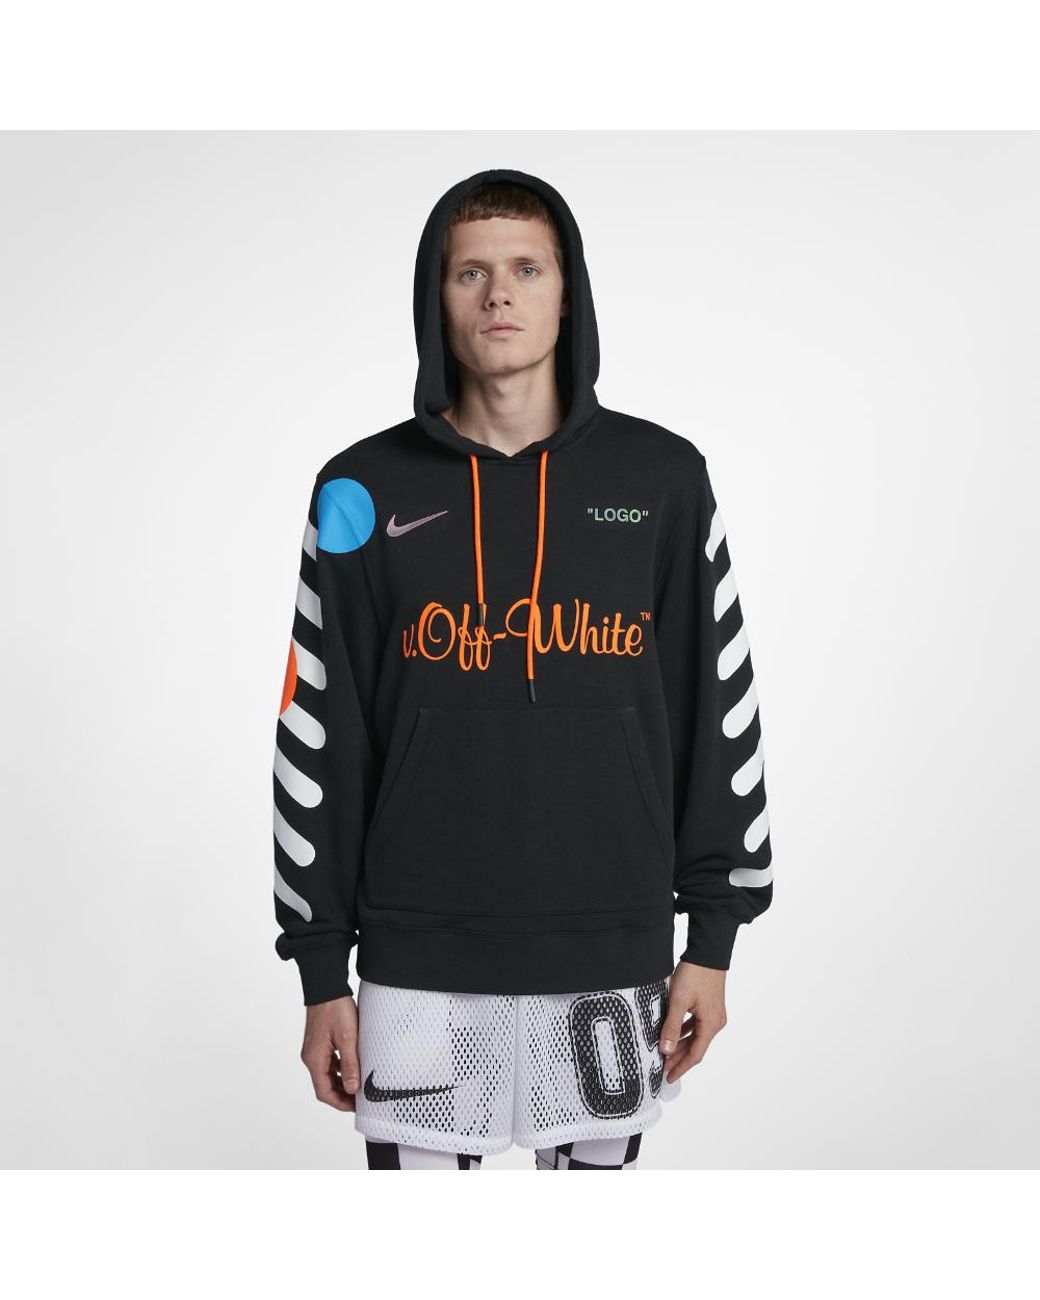 How To Tell If A Off White Hoodie Is Fake | lupon.gov.ph